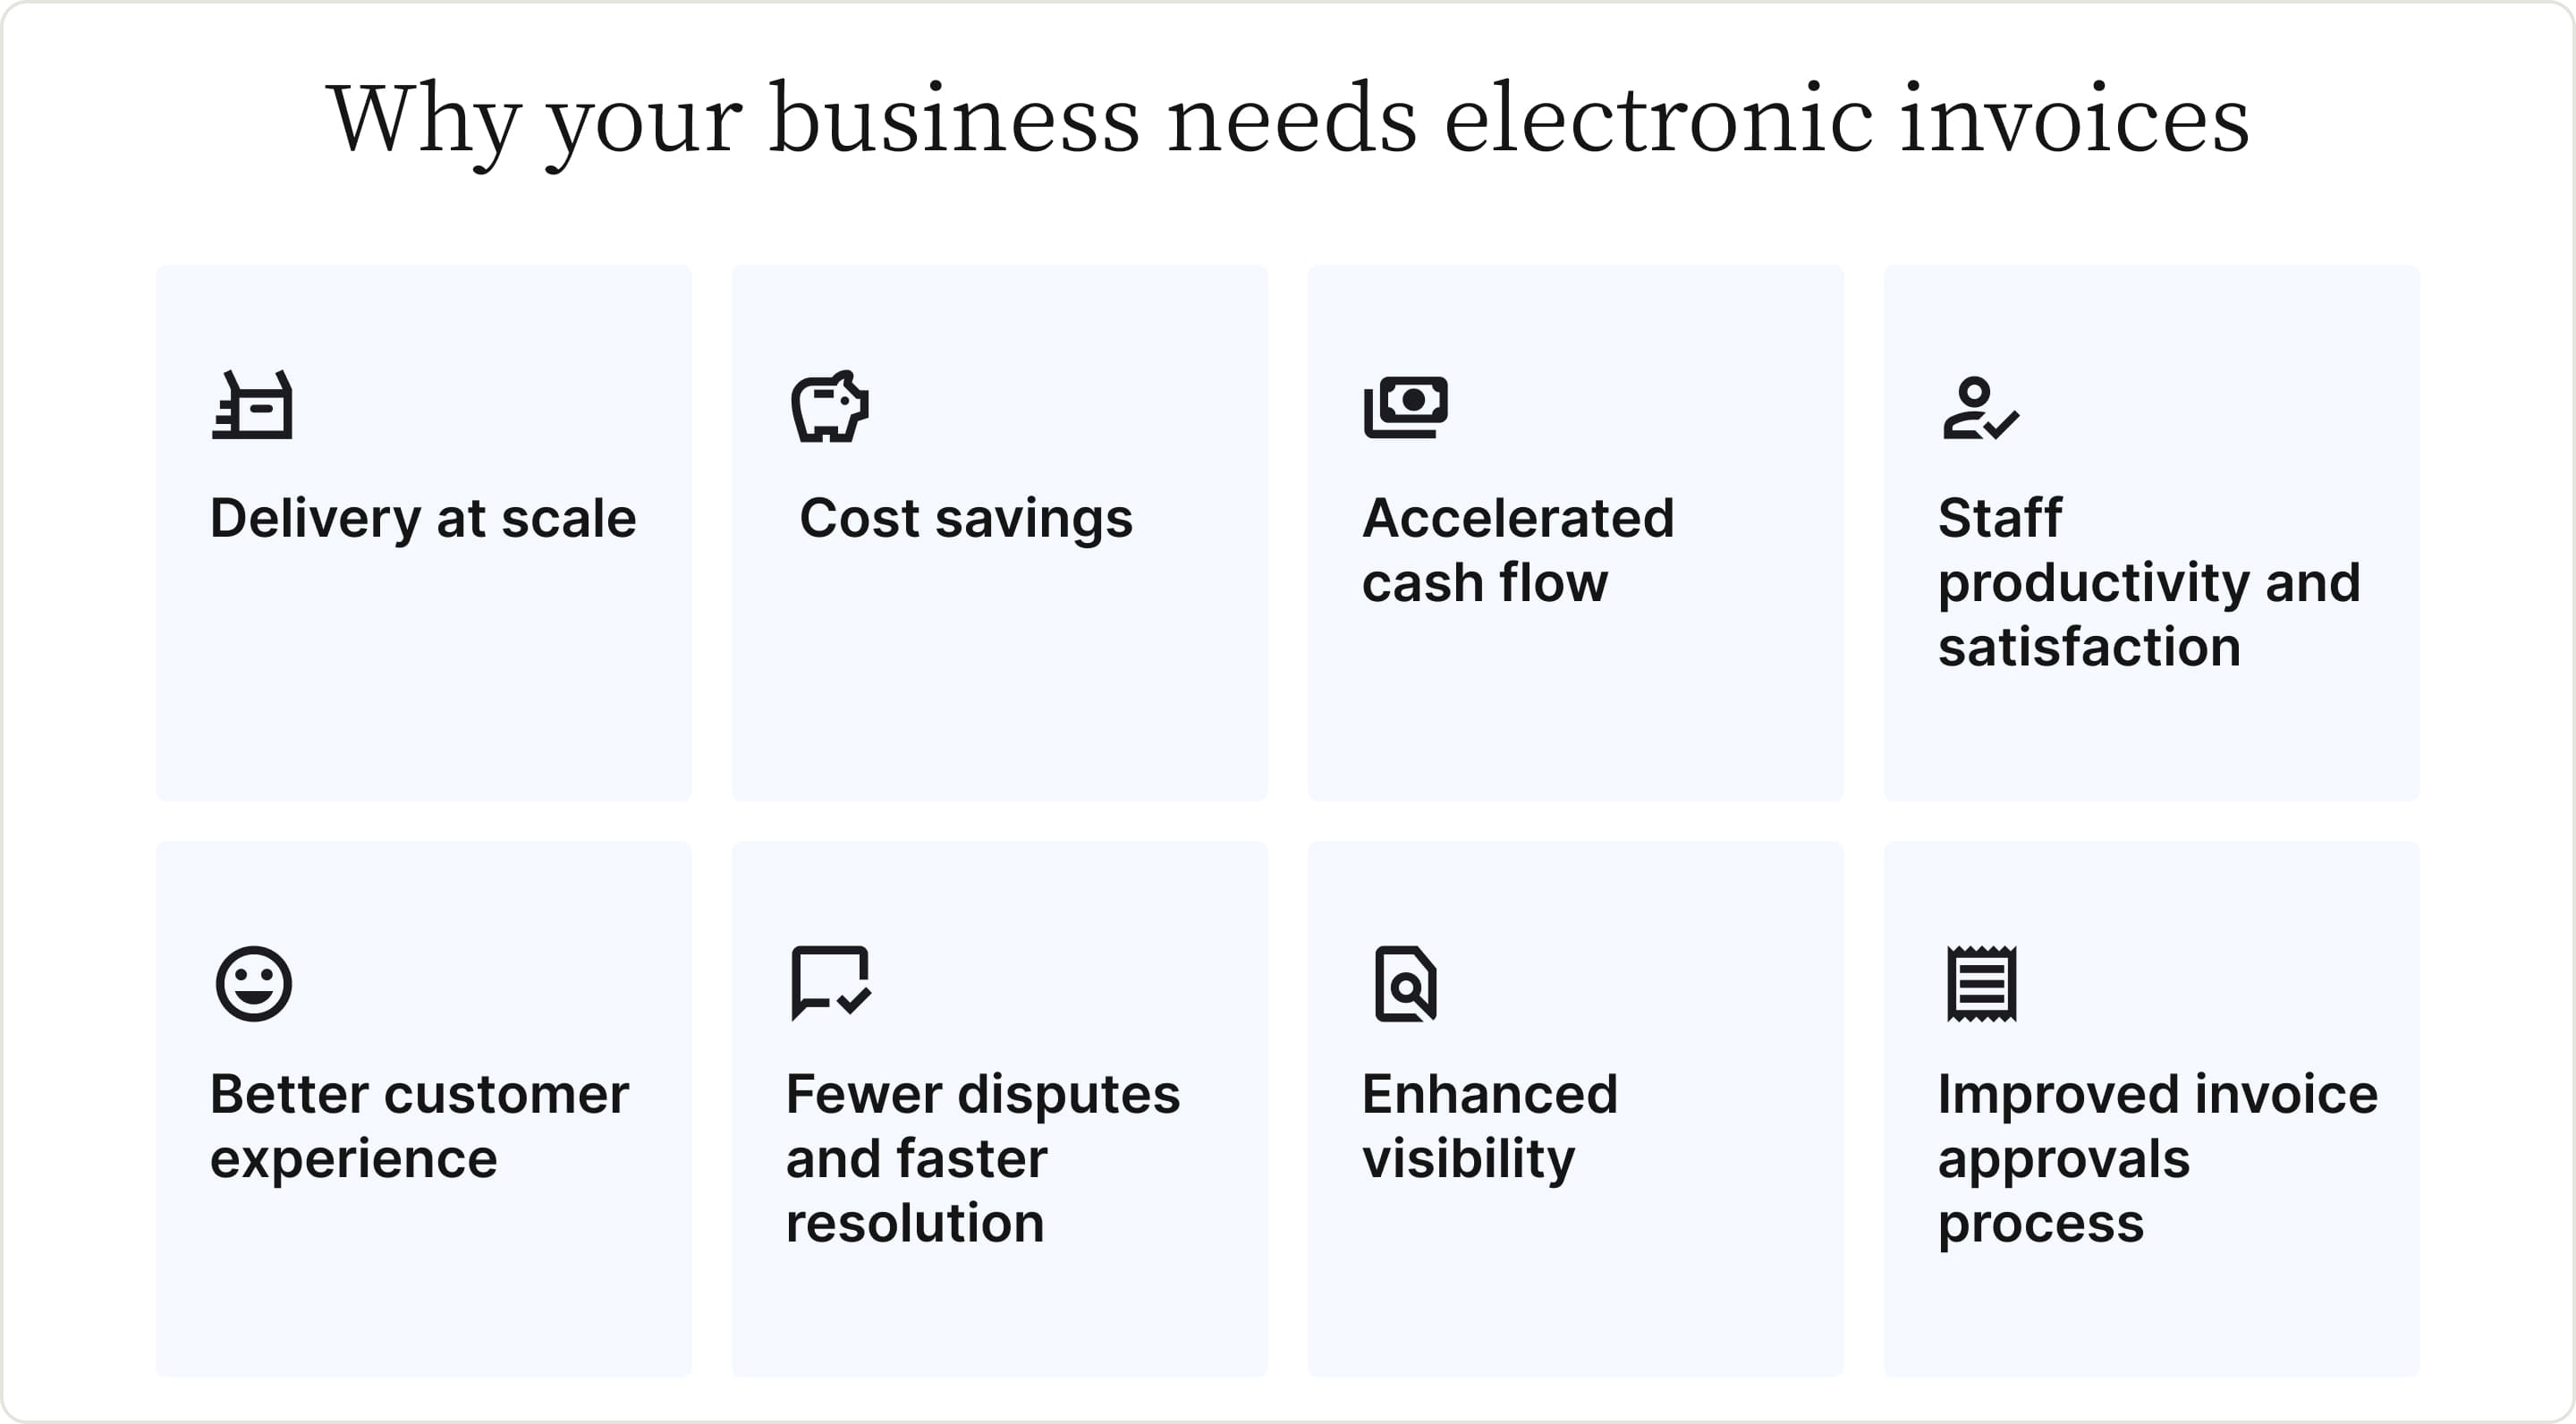 Why your business needs electronic invoices